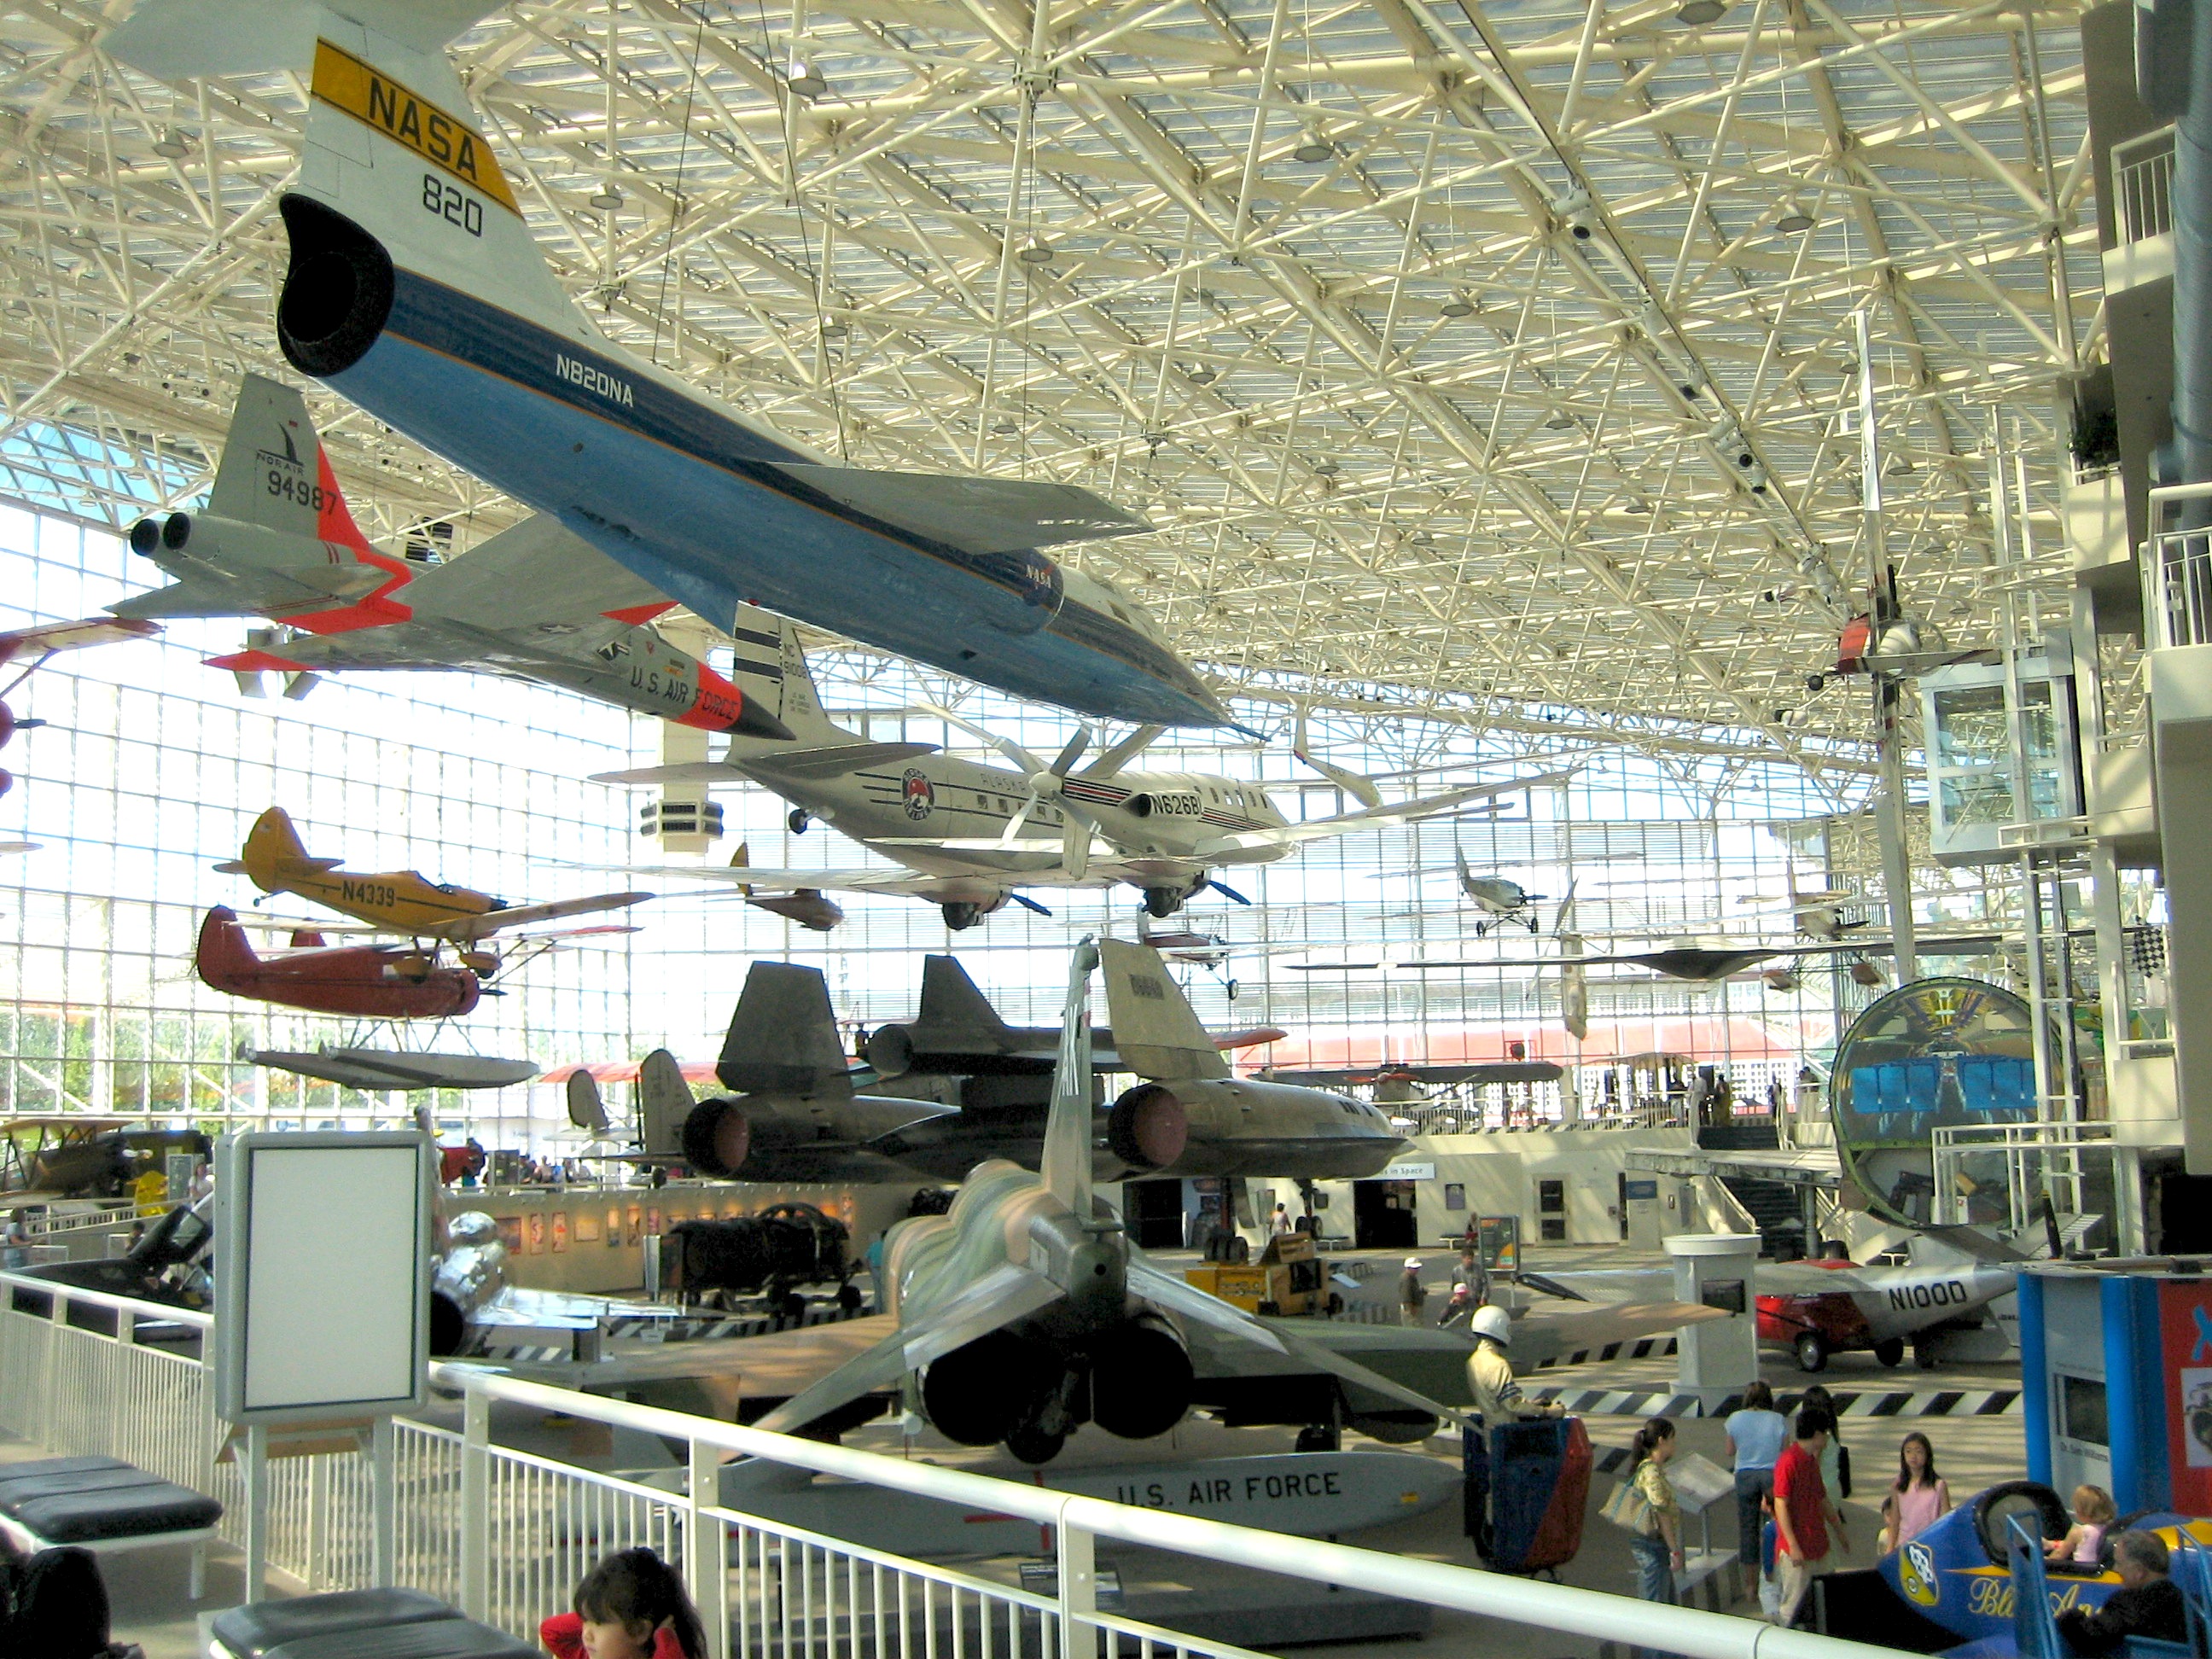 The main display area of the Museum of Flight, located at Boeing Field, Seattle, Washington. (Photo via Wikipedia)